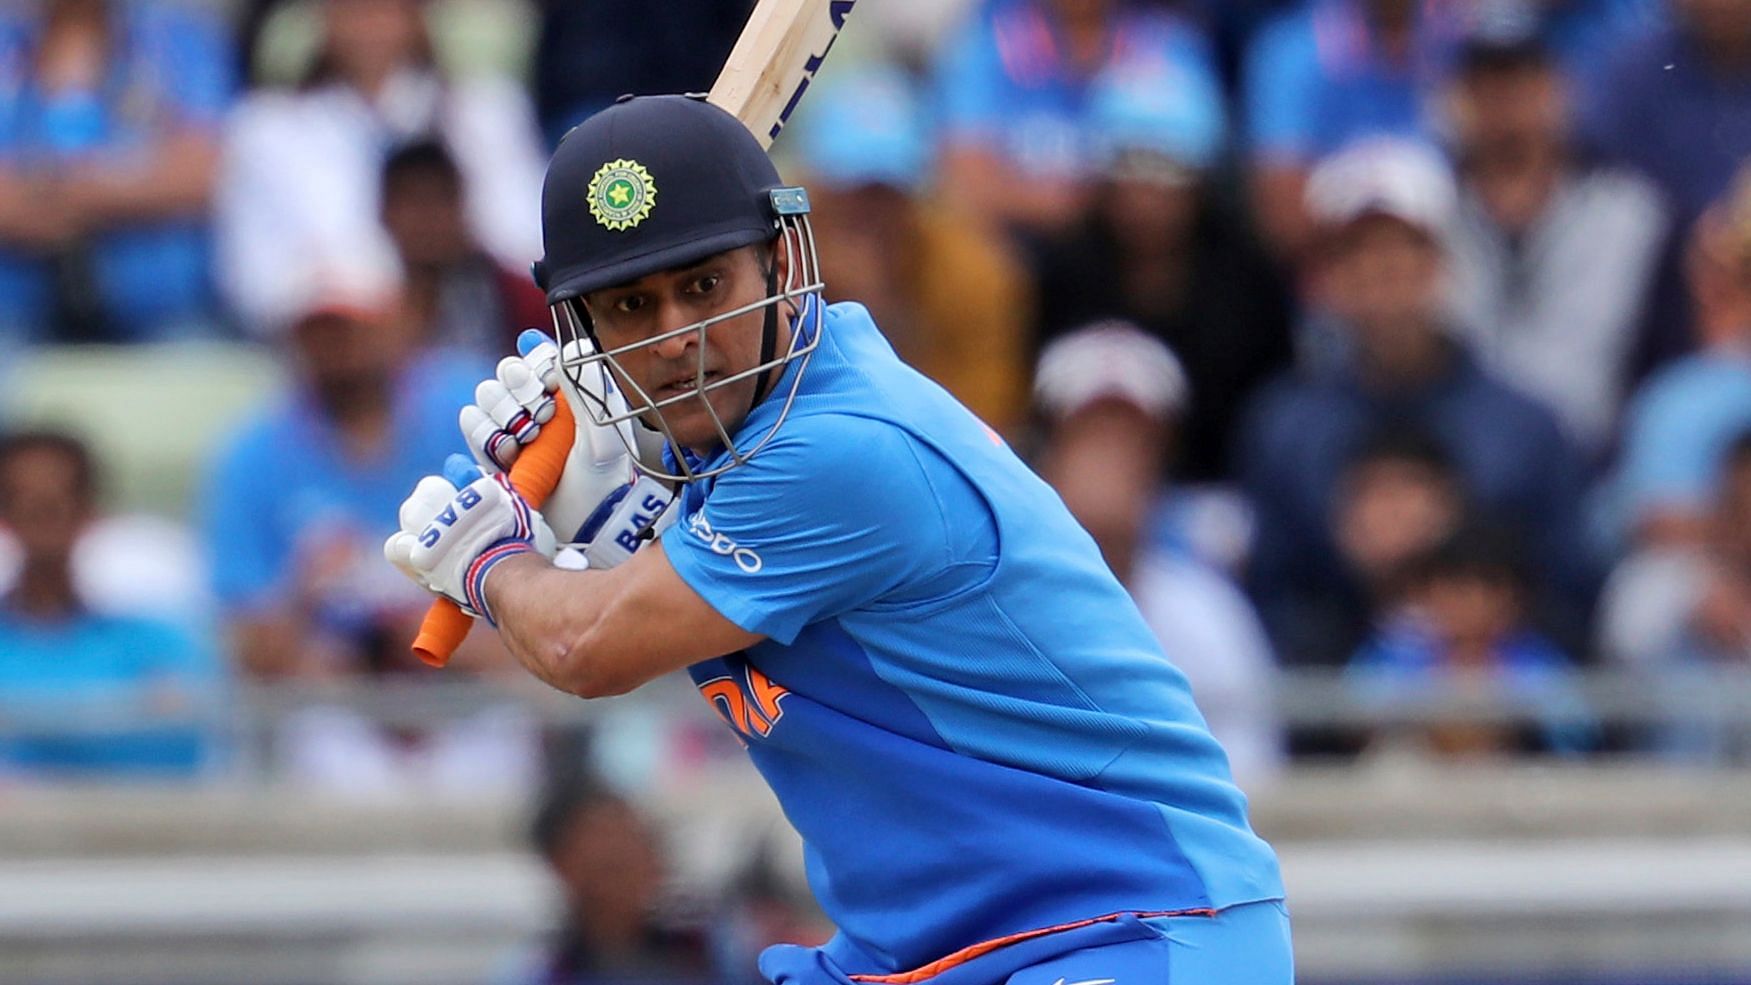 Sachin Tendulkar said he did not find anything wrong with Mahendra Singh’s approach in the World Cup clash against Bangladesh.